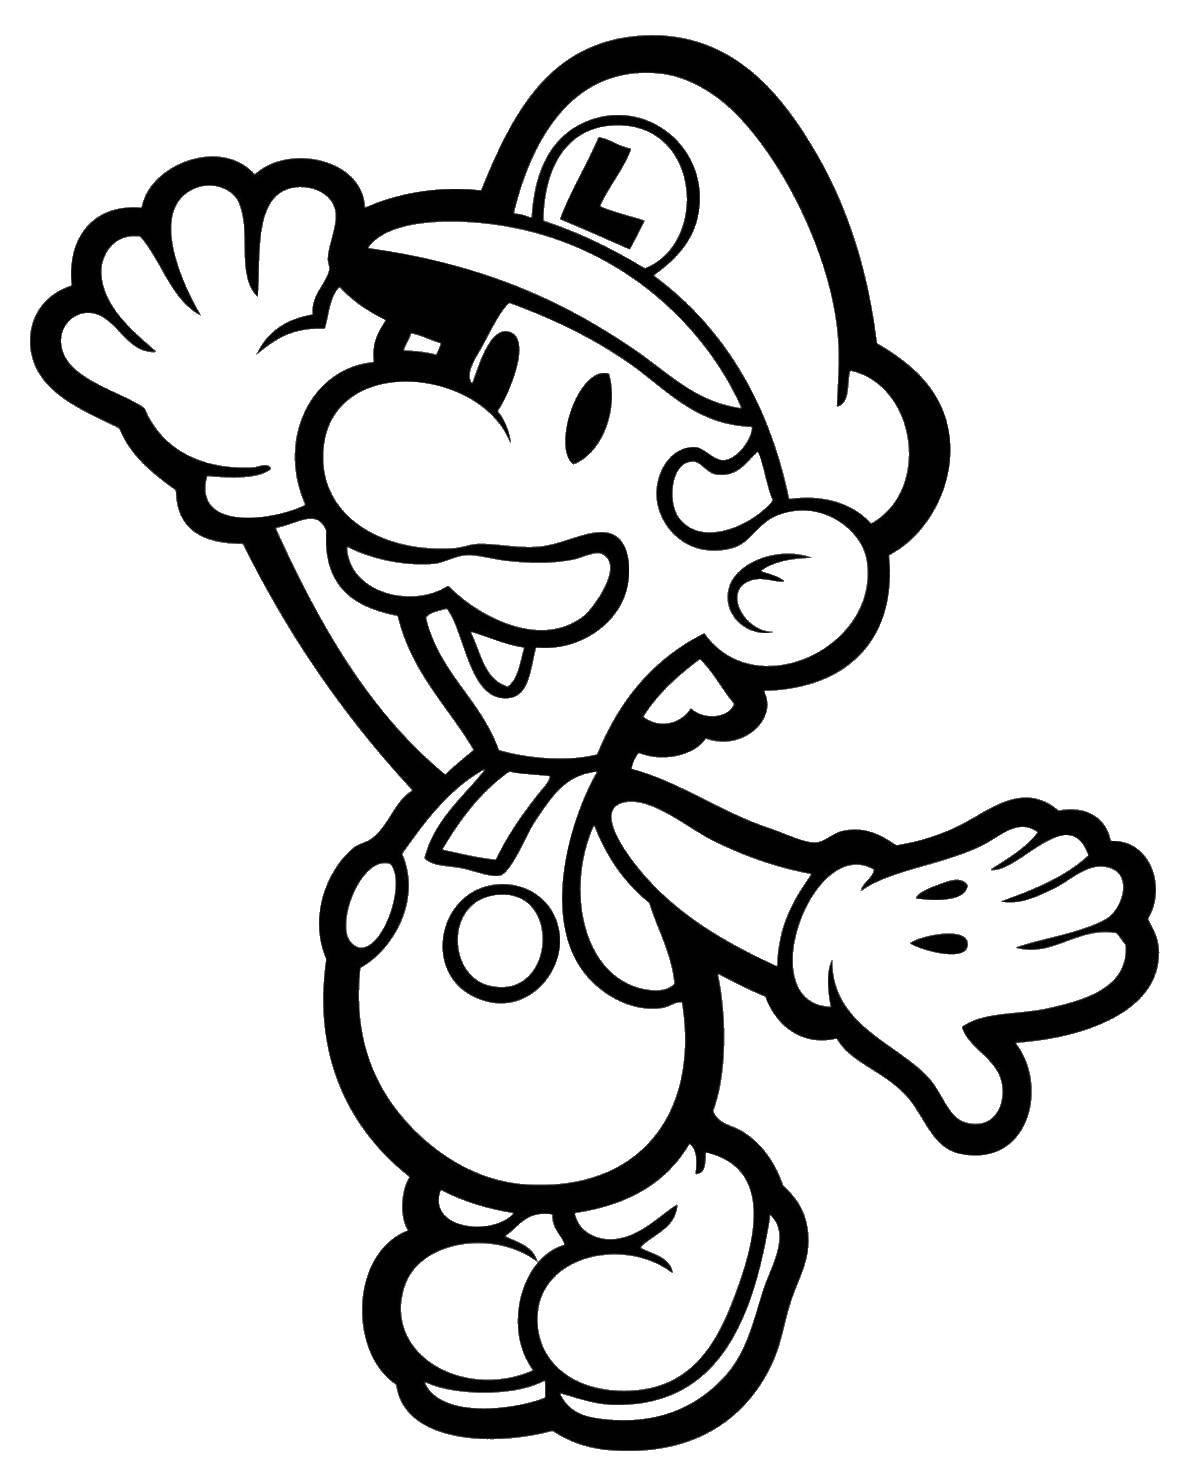 Coloring Luigi Mario from the game. Category The character from the game. Tags:  Games, Mario.